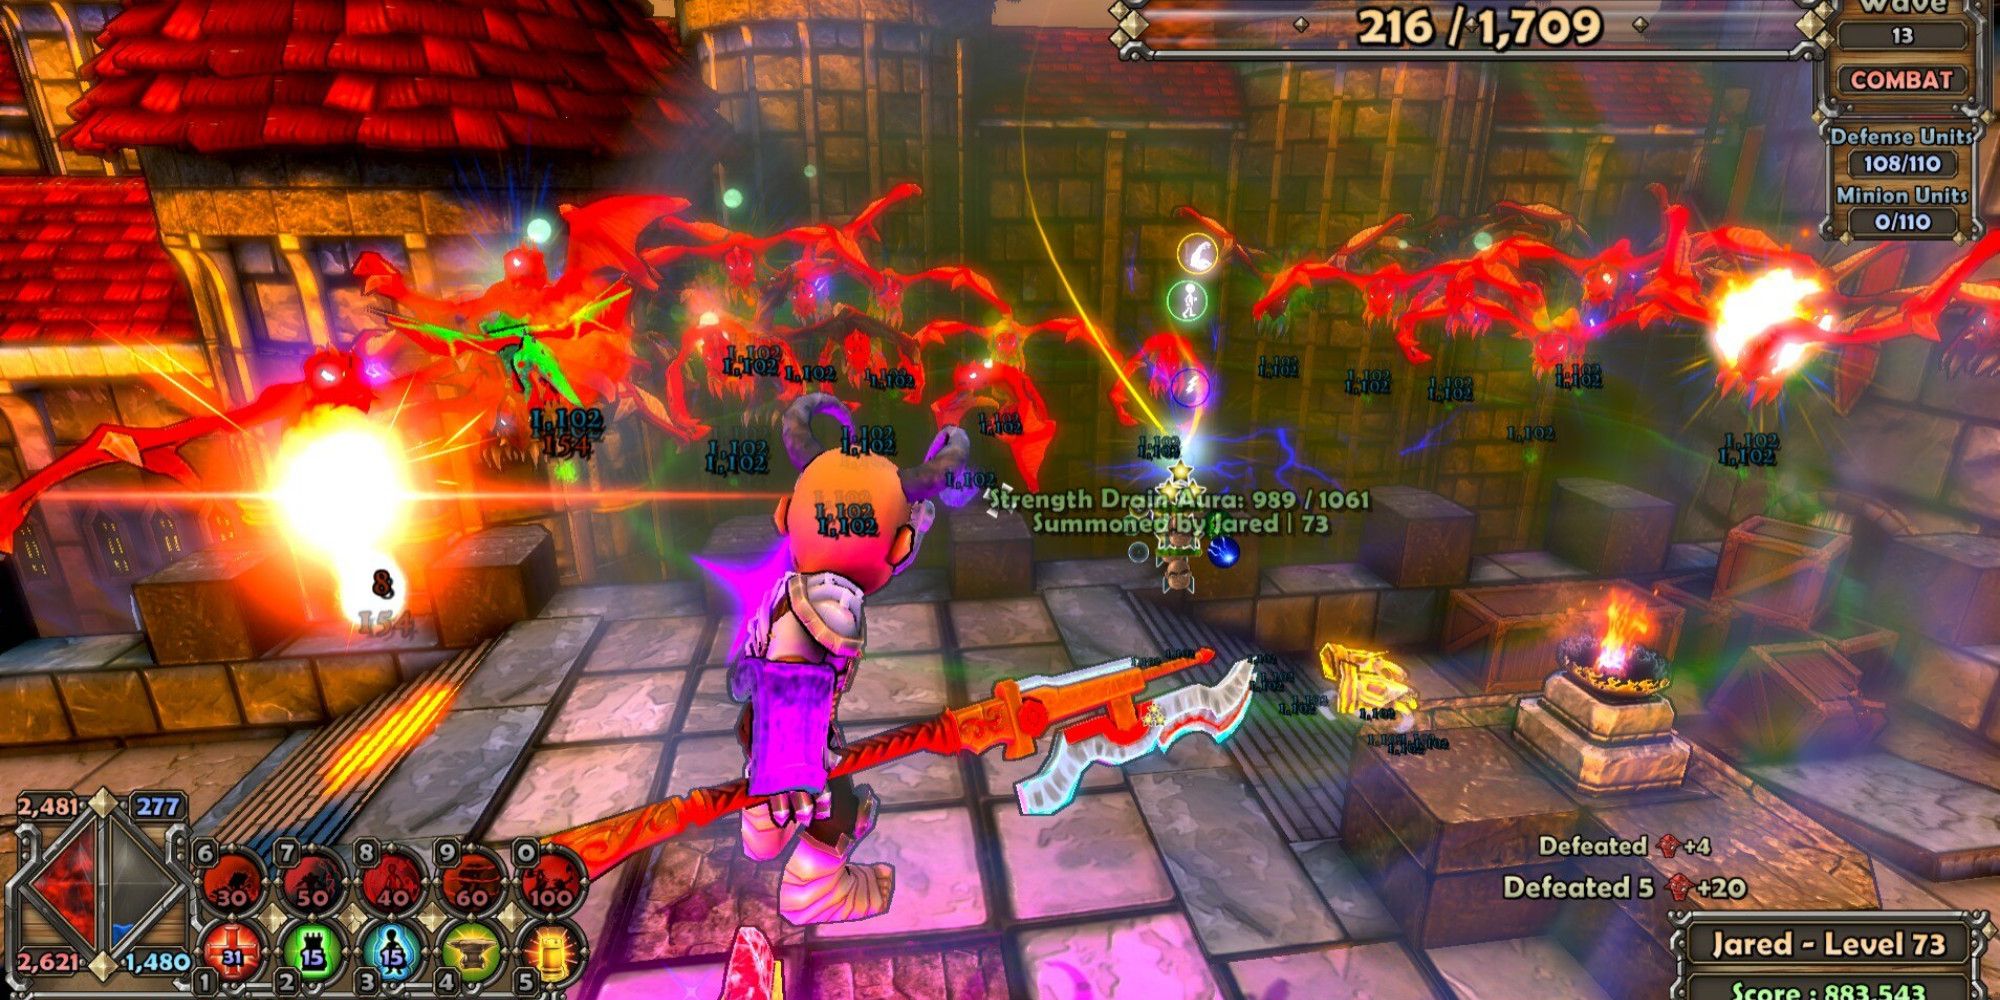 A swarm of bats attacking in Dungeon Defenders